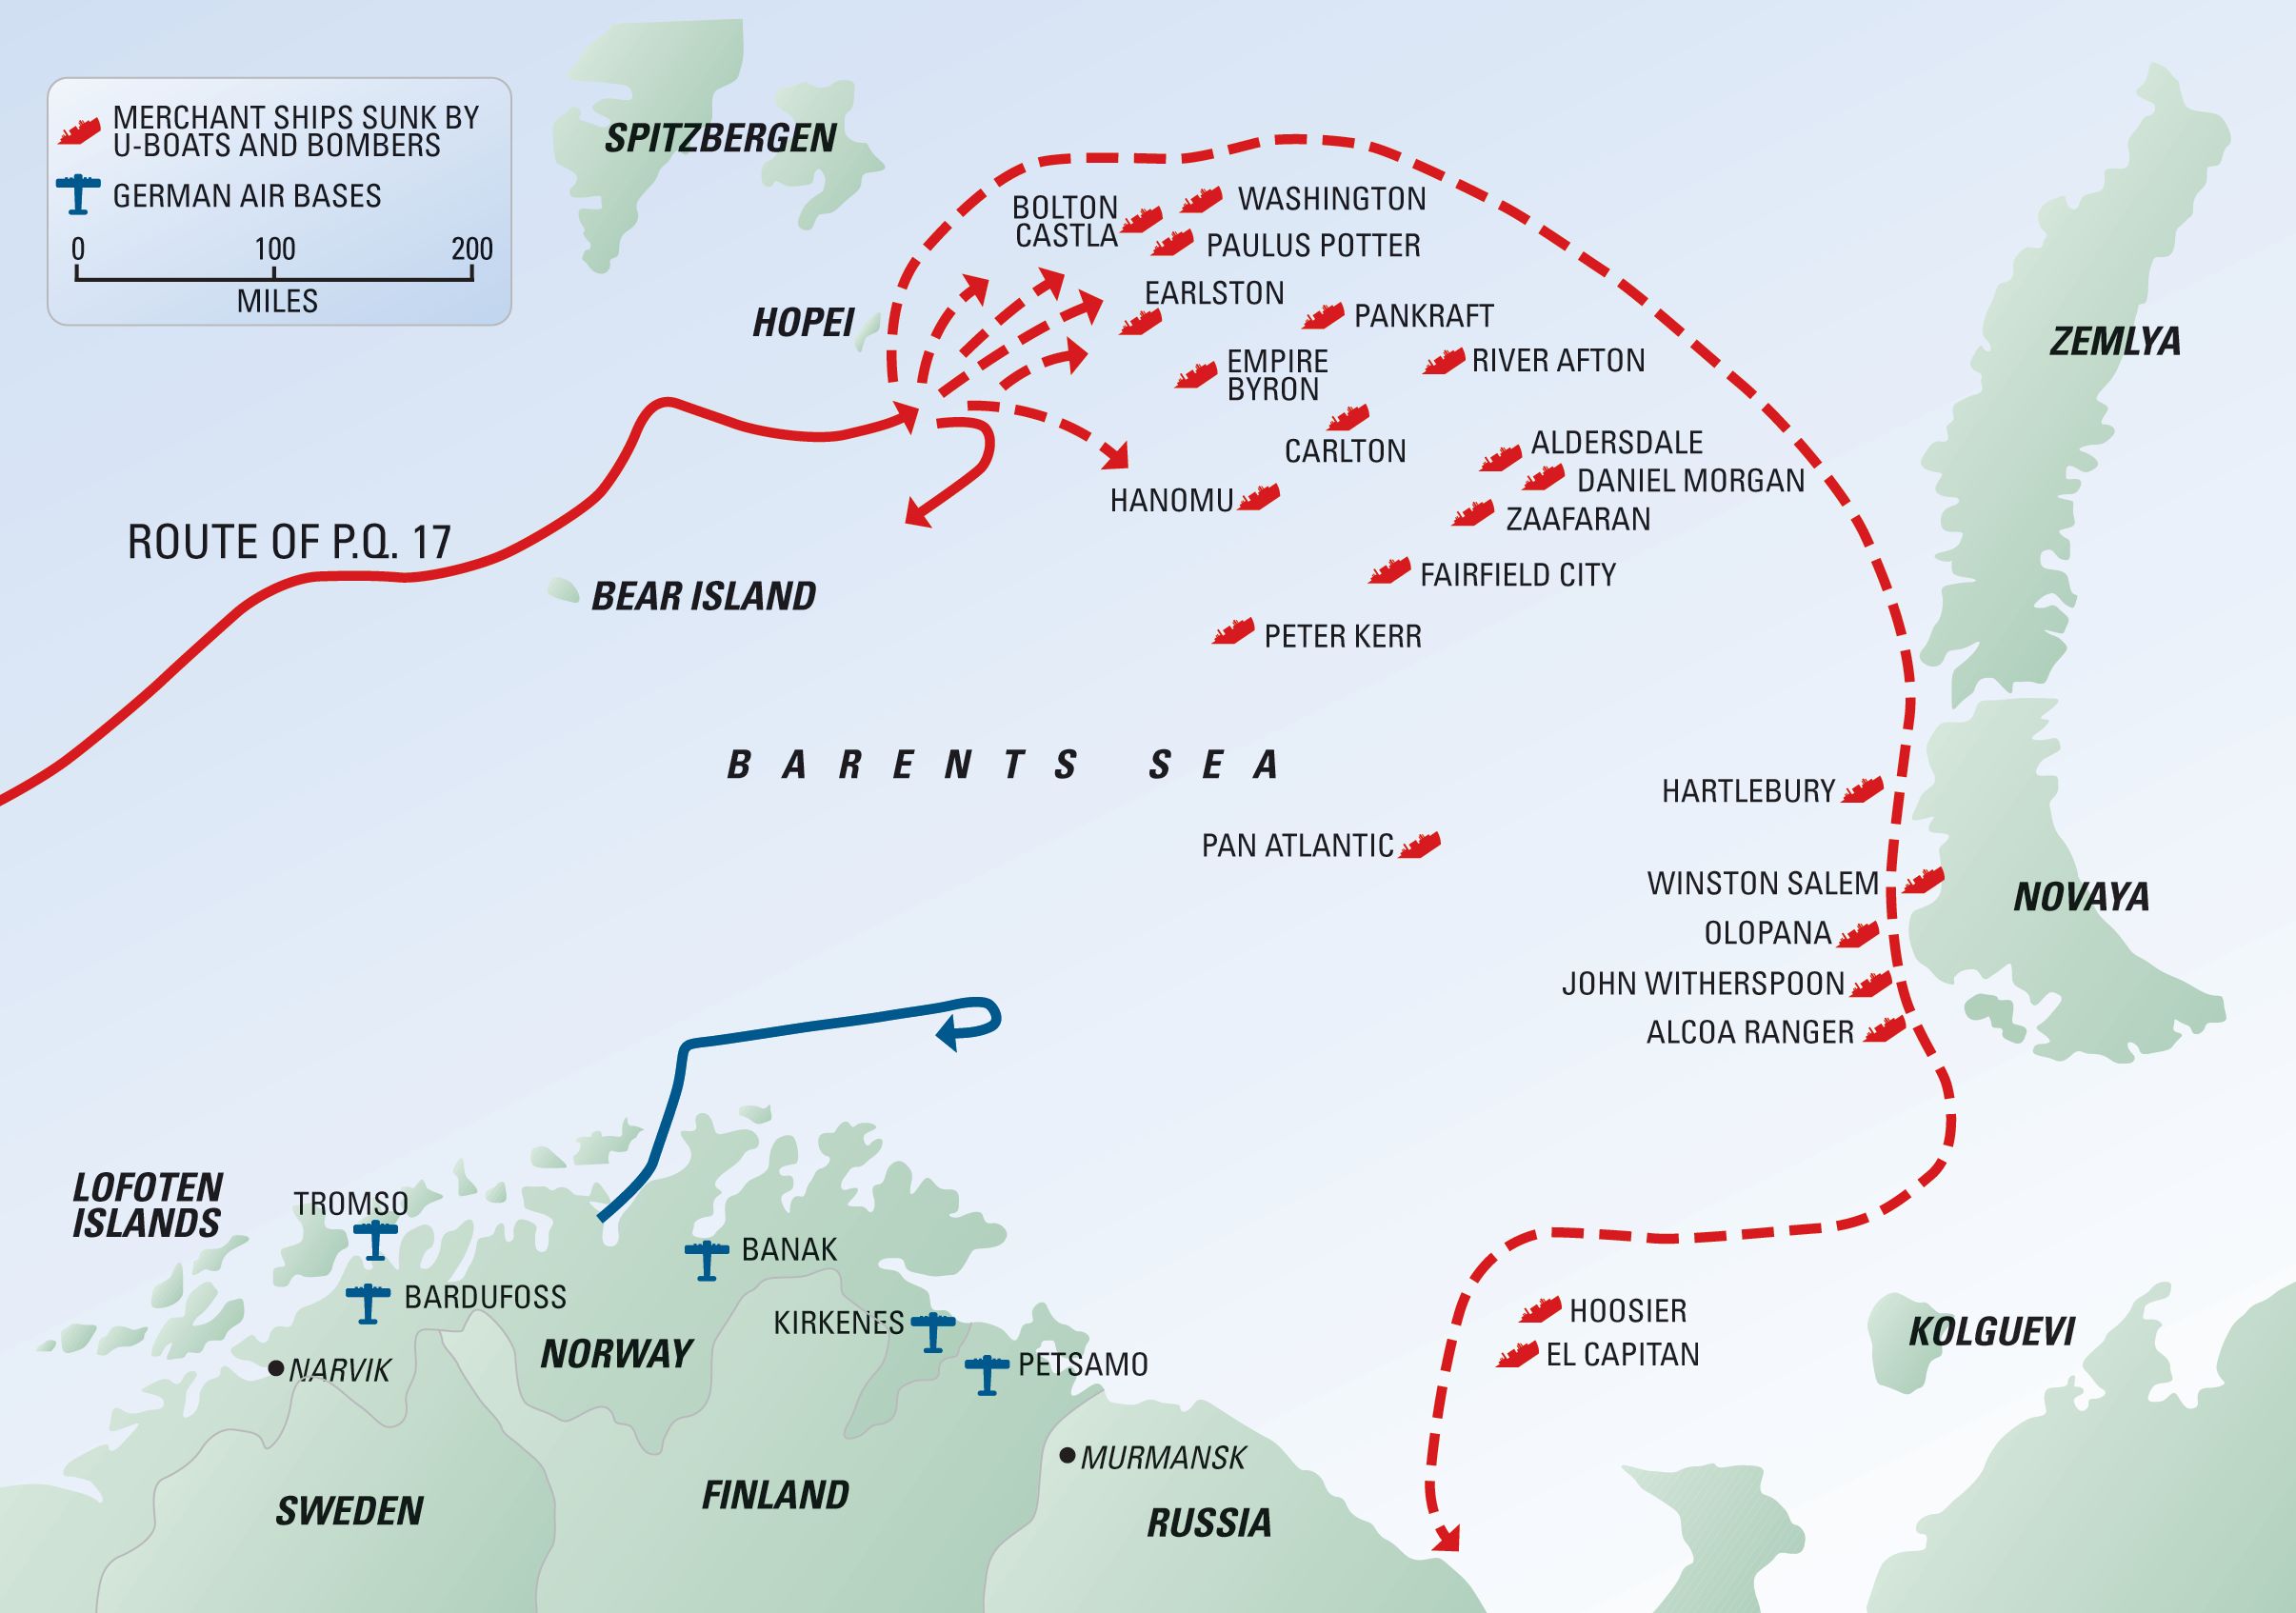 When Convoy PQ-17 scattered, German aircraft and U-boats took a fearful toll of merchant shipping bound for the Soviet Union with vital war matériel. A German naval squadron actually sortied from Norway (shown as blue arrow) but was recalled prior to engaging any of the Allied vessels.